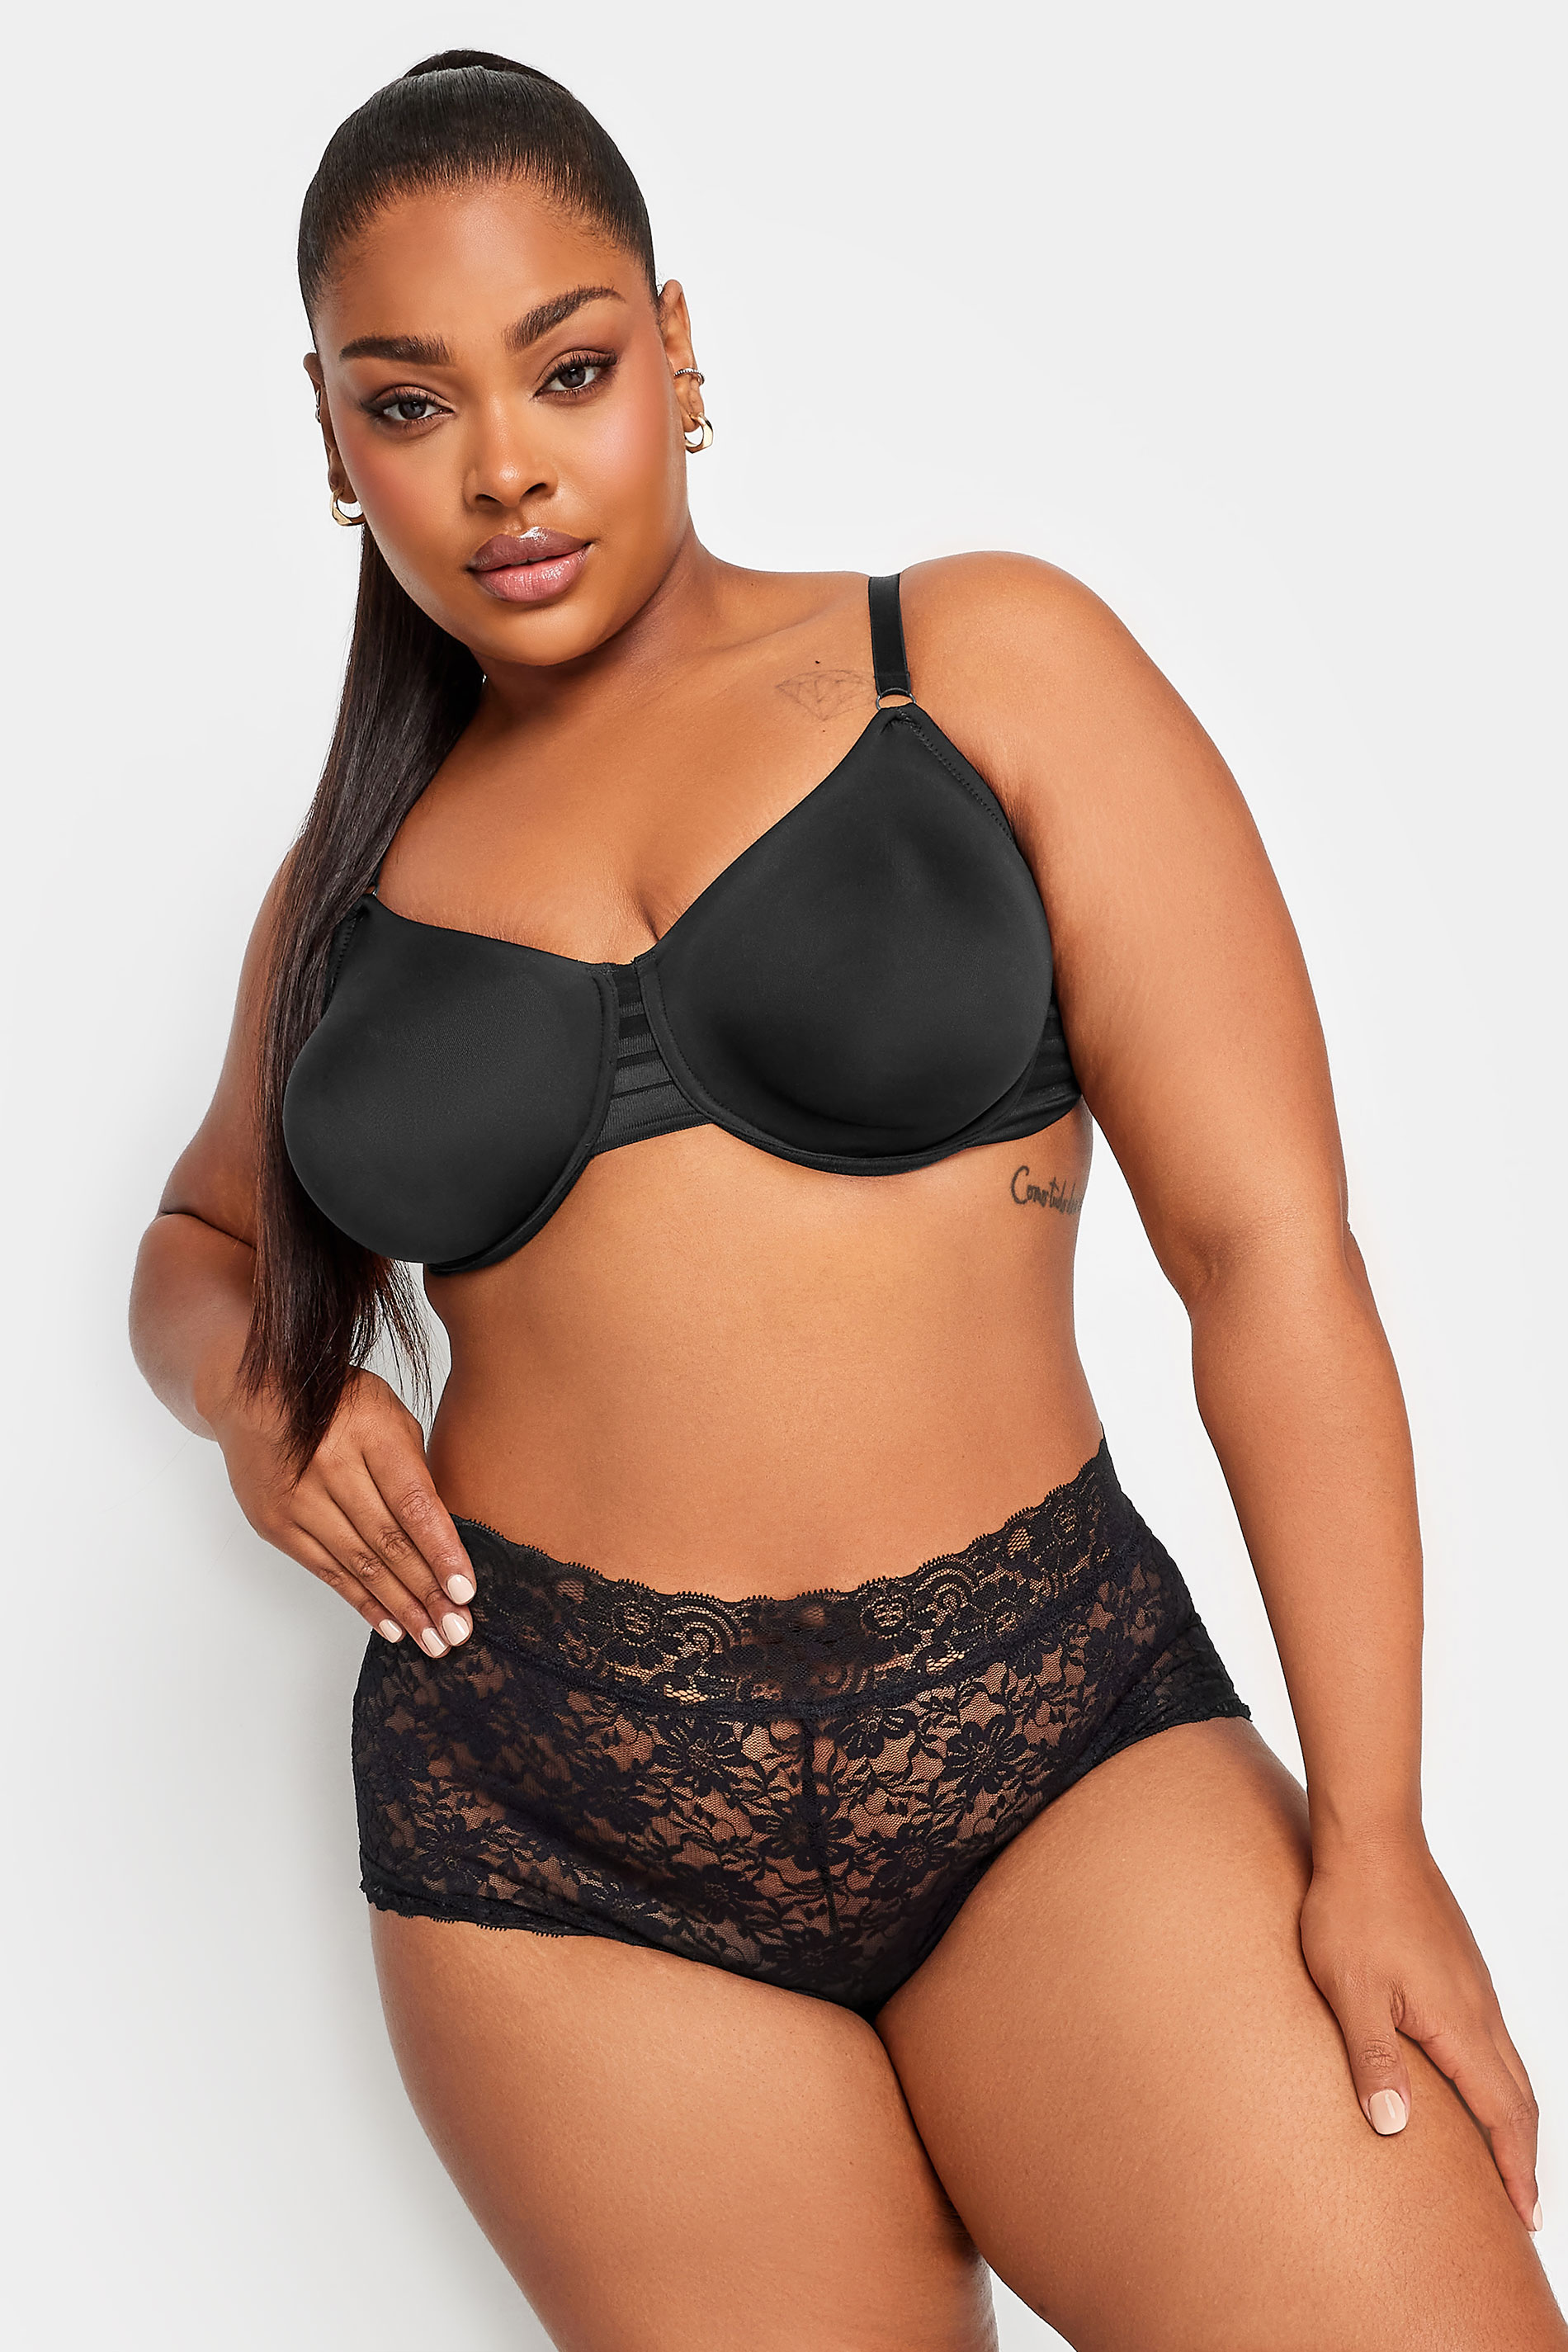 Sofra seamless black bra with removable pads two bras new without tags Size  undefined - $10 - From GetFit